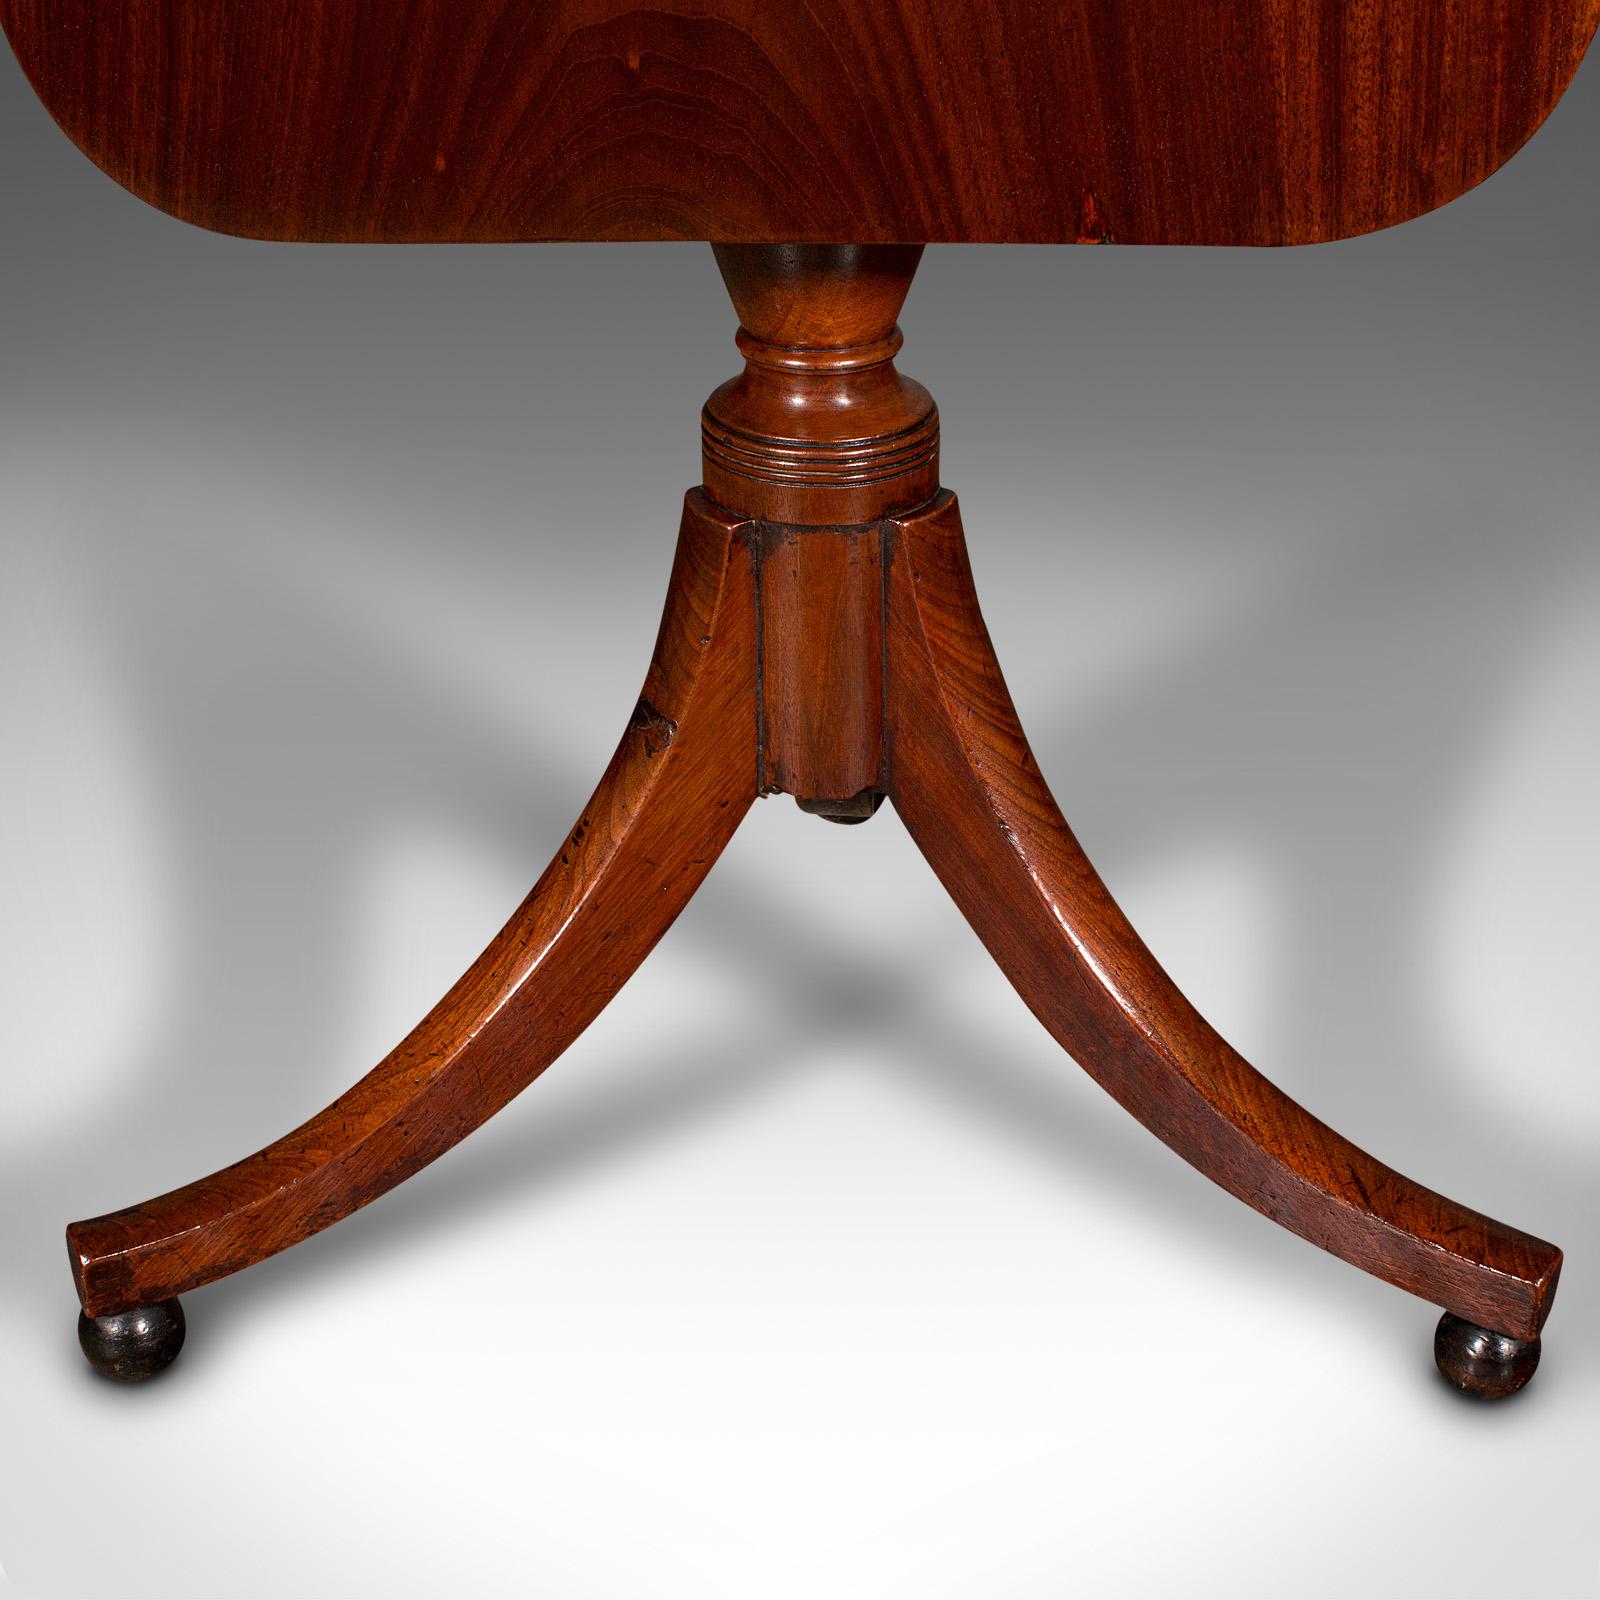 Antique Supper Table, English, Snap Top, Lamp, Occasional, Regency, Circa 1820 For Sale 5